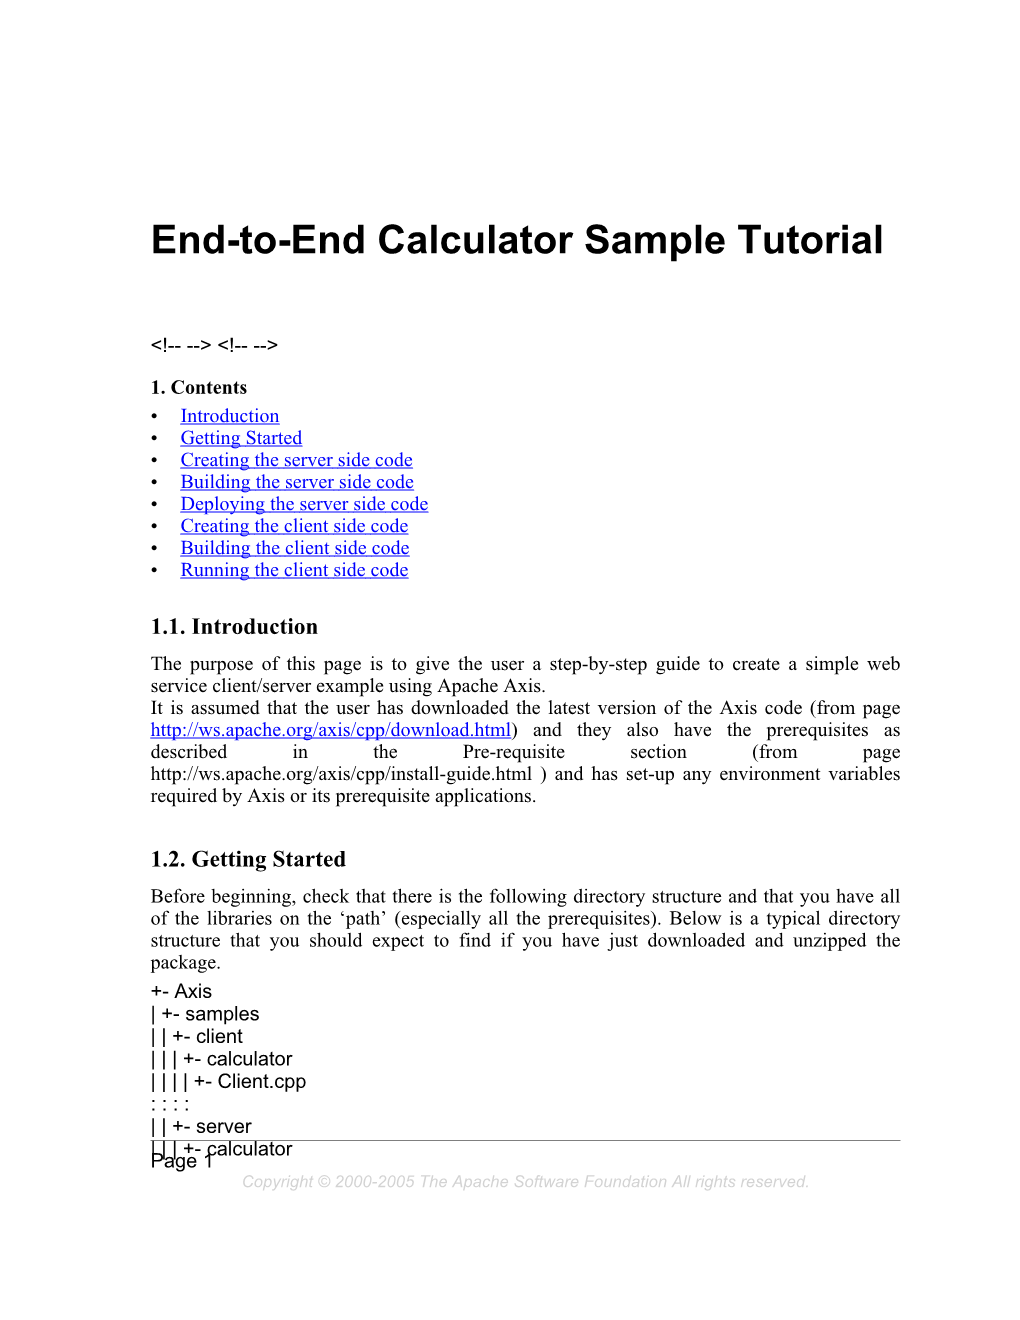 End-To-End Calculator Sample Tutorial